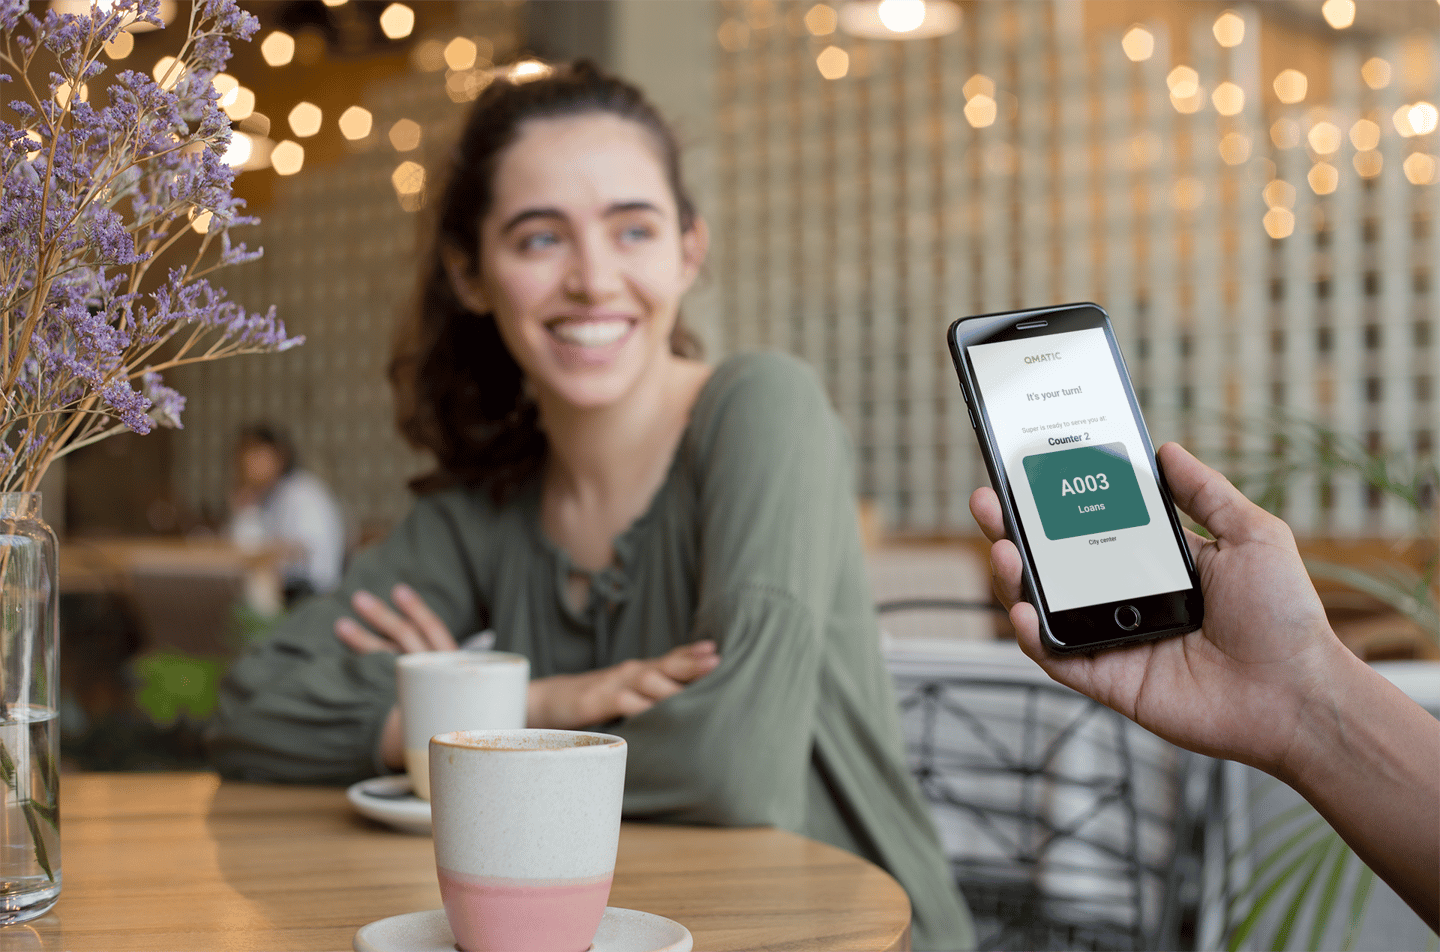 space-gray-iphone-8-plus-mockup-featuring-a-man-with-a-girl-at-a-coffee-shop-a21265 (2)